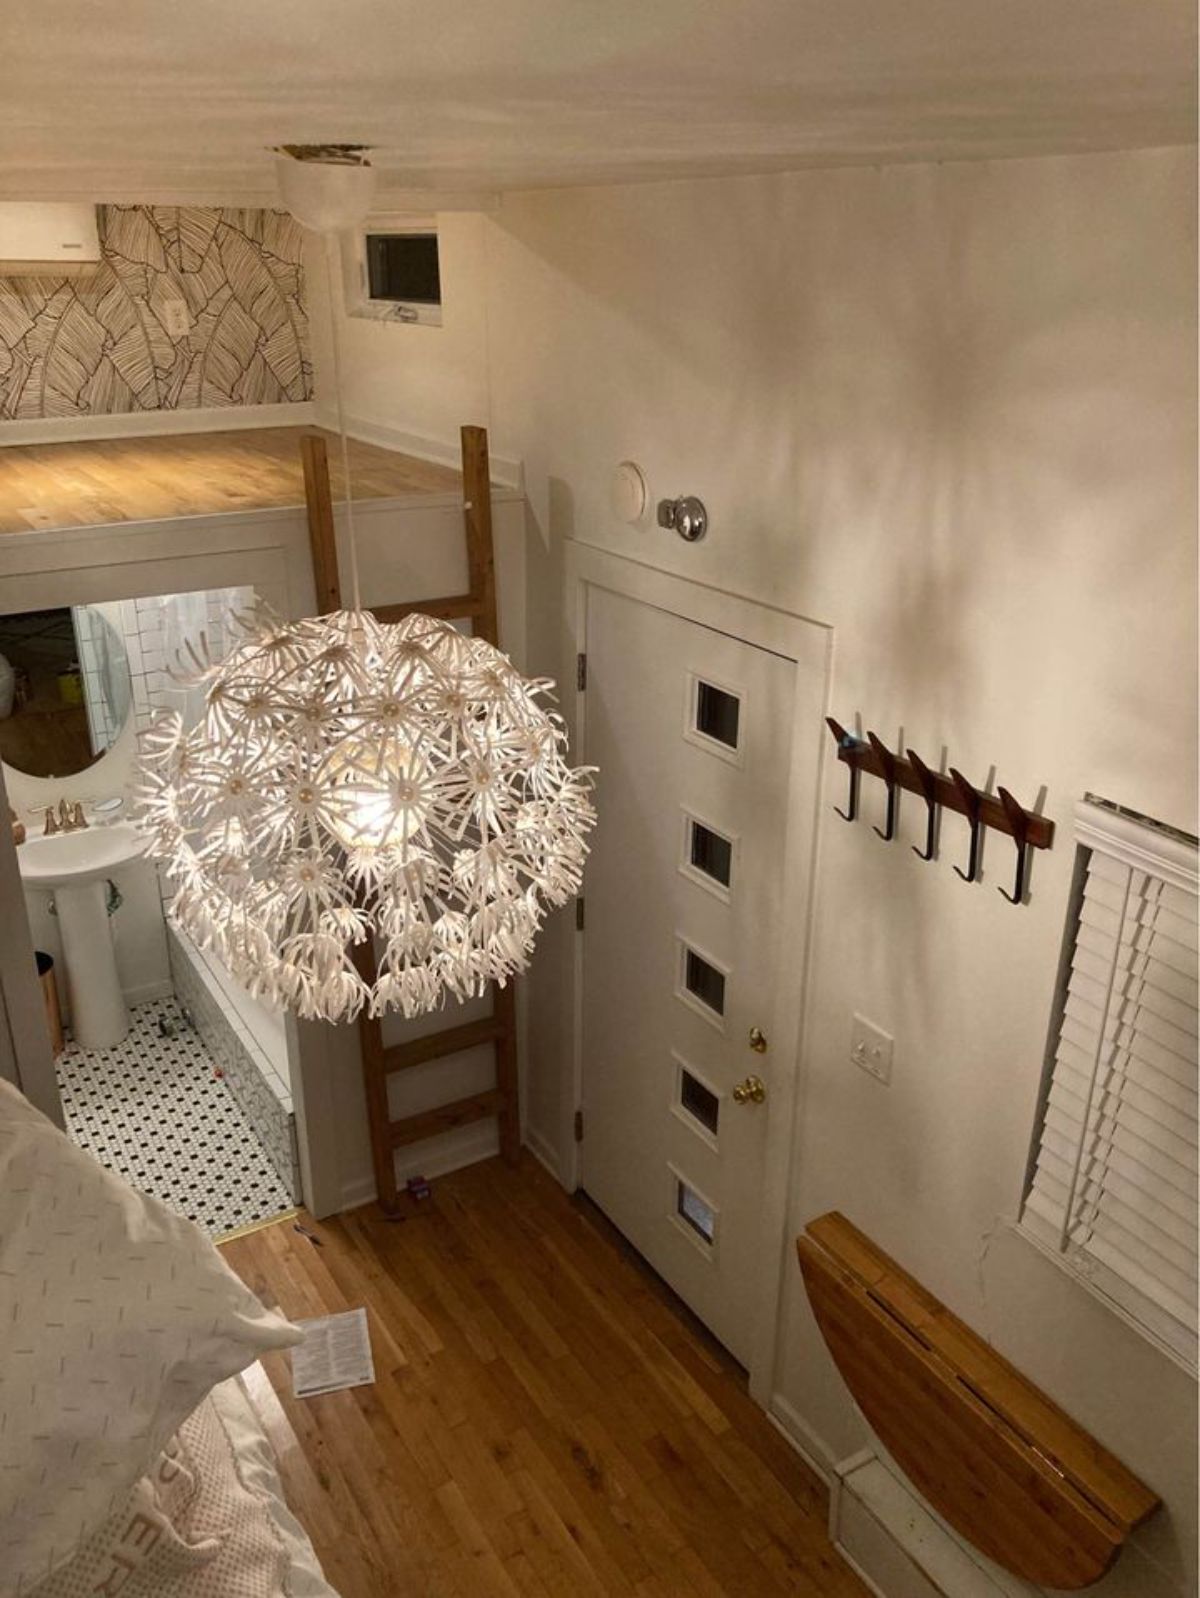 Fancy chandelier style light in living room of 24' Tiny Home